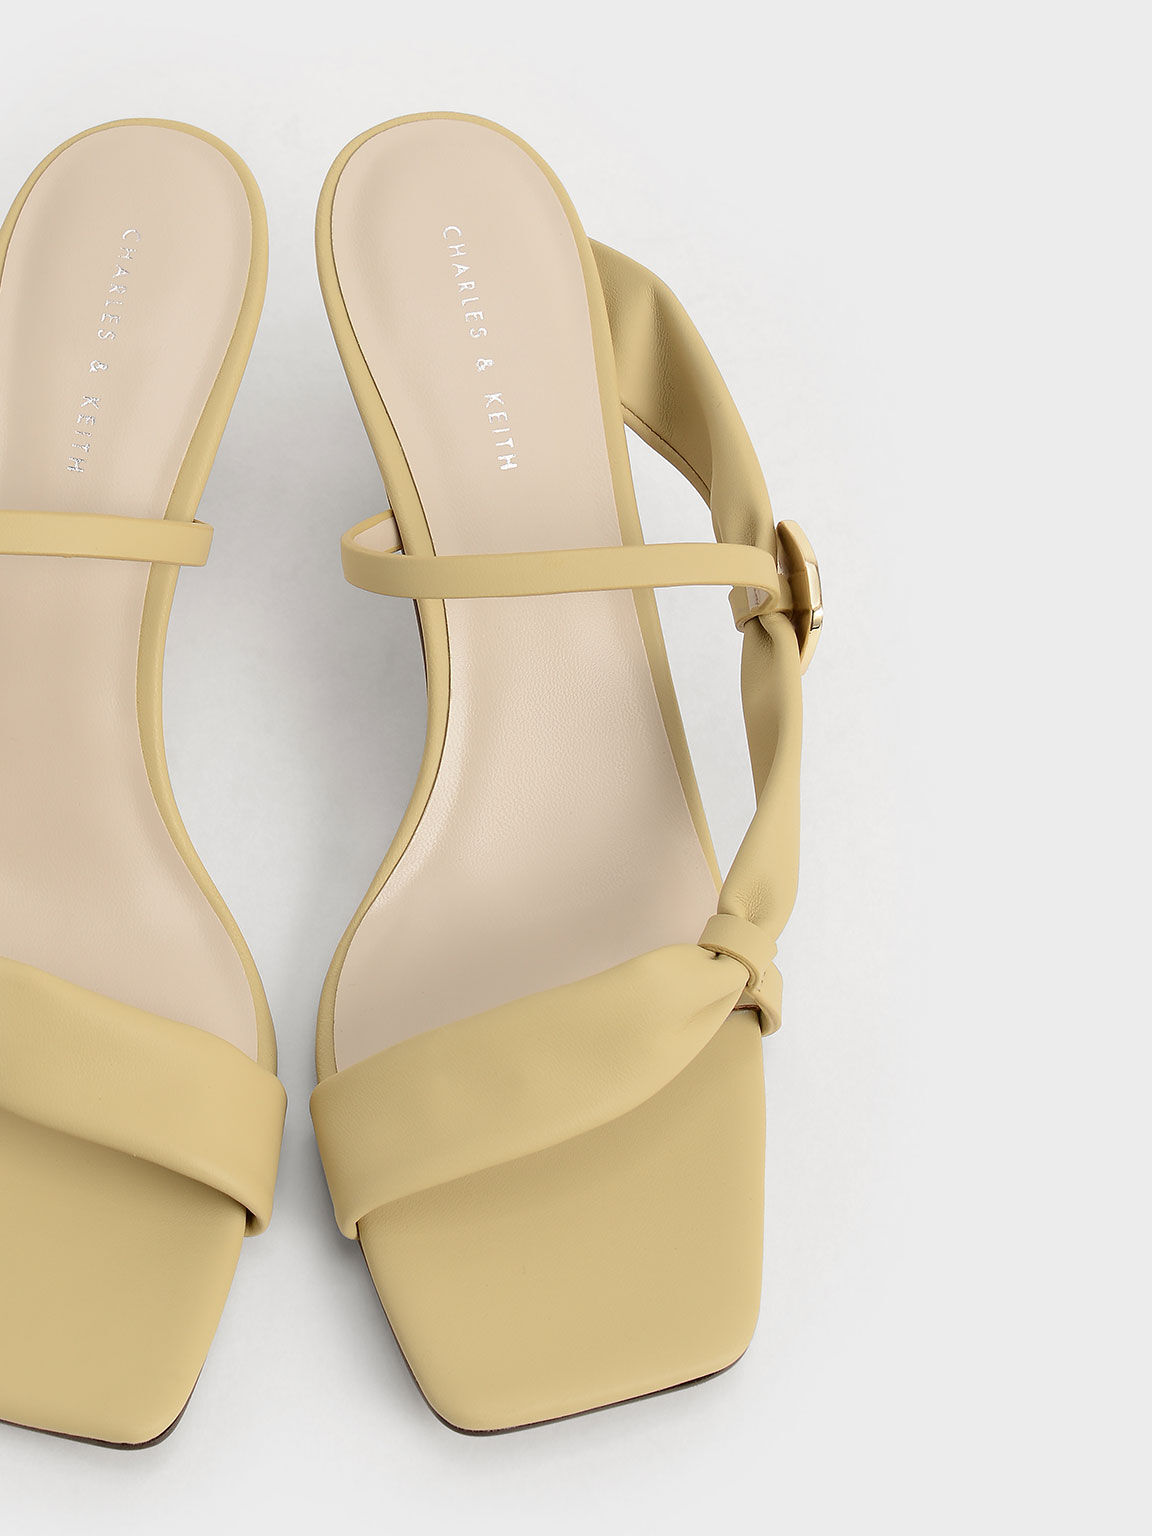 Embellished Puffy Strap Mules, Yellow, hi-res